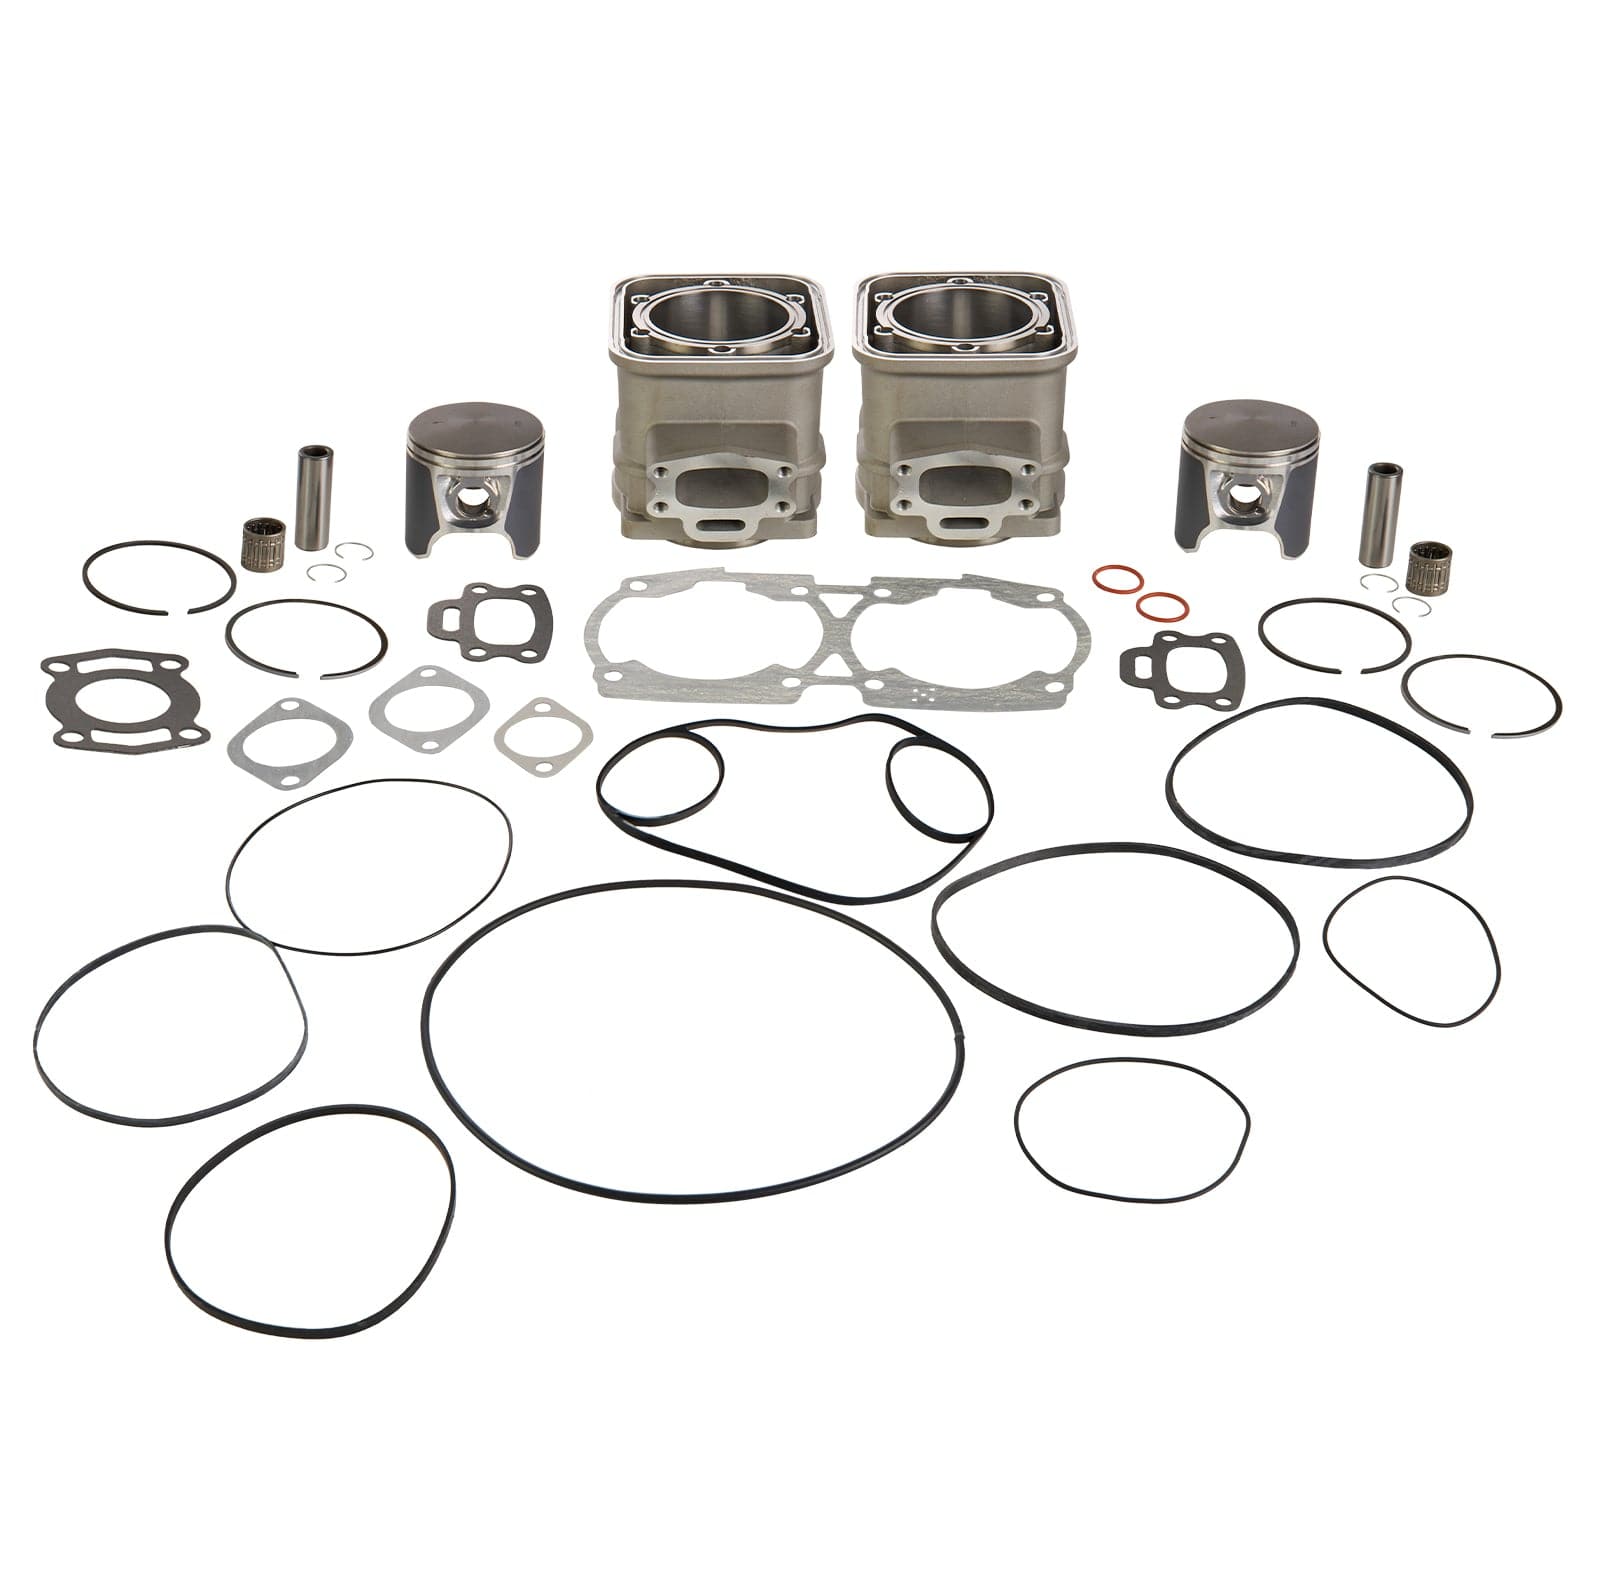 New SBT Brand Cylinder Kit for Sea-Doo 717/720